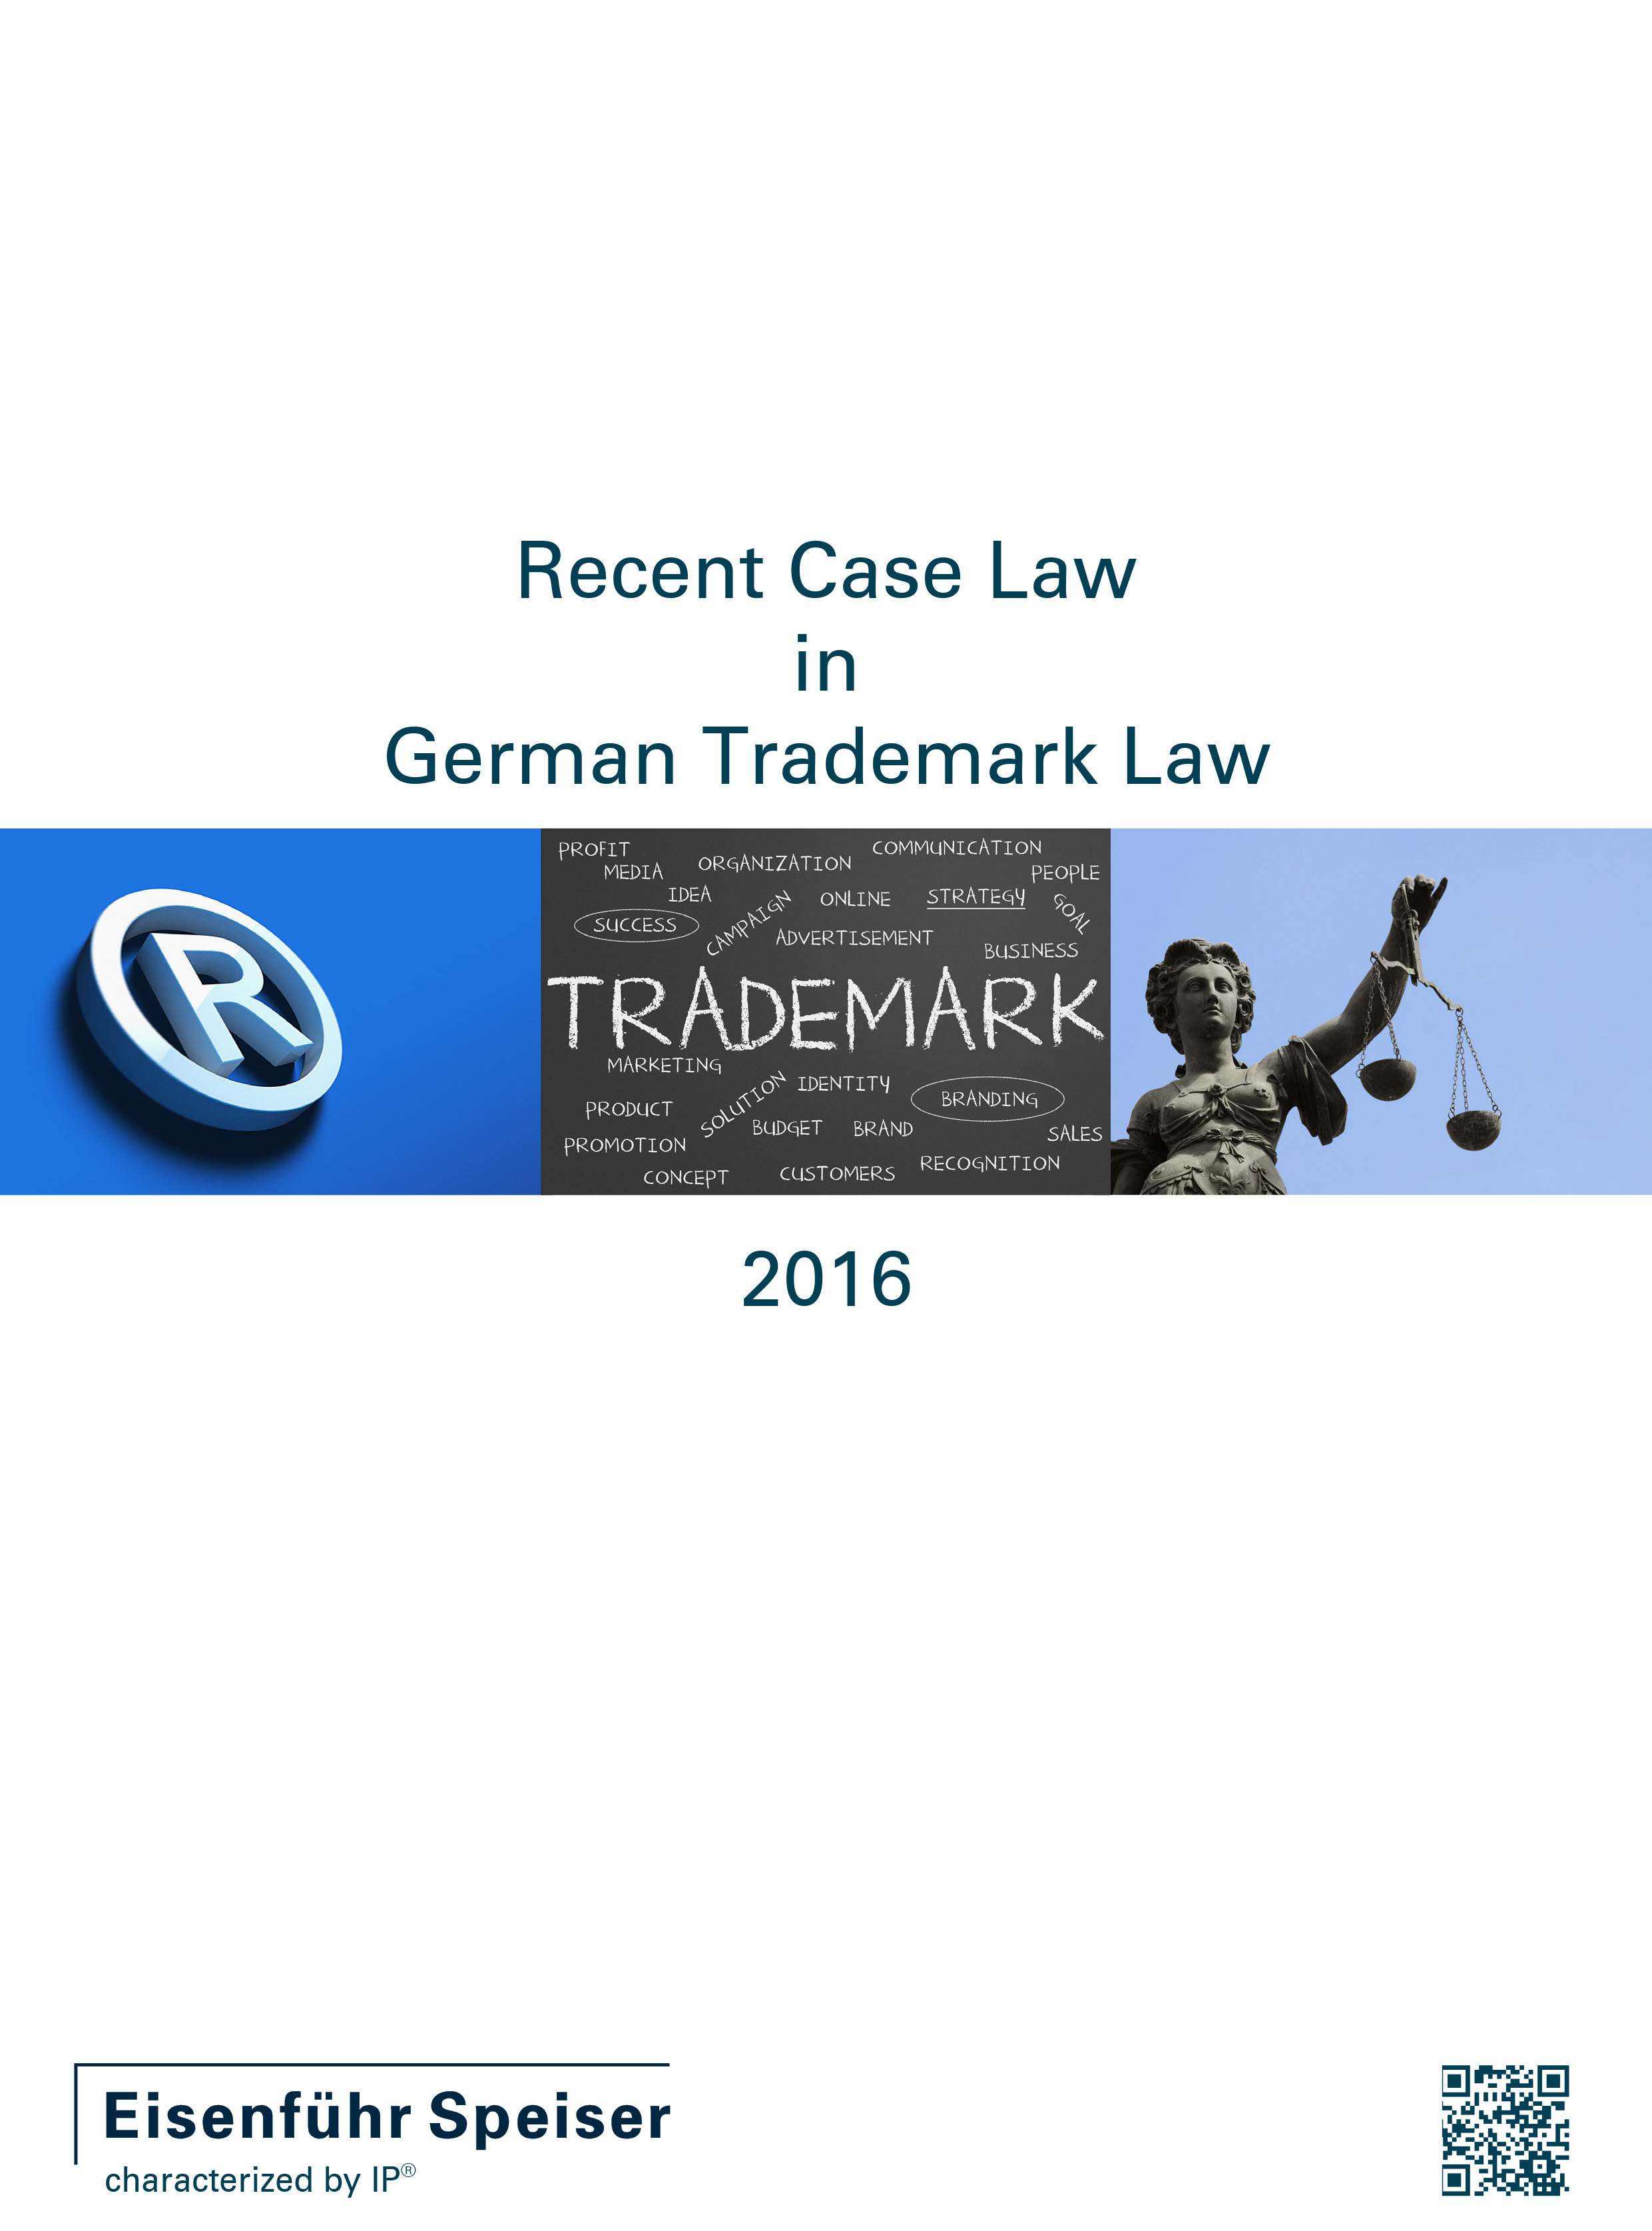 Recent Case Law in German Trademark Law 2016